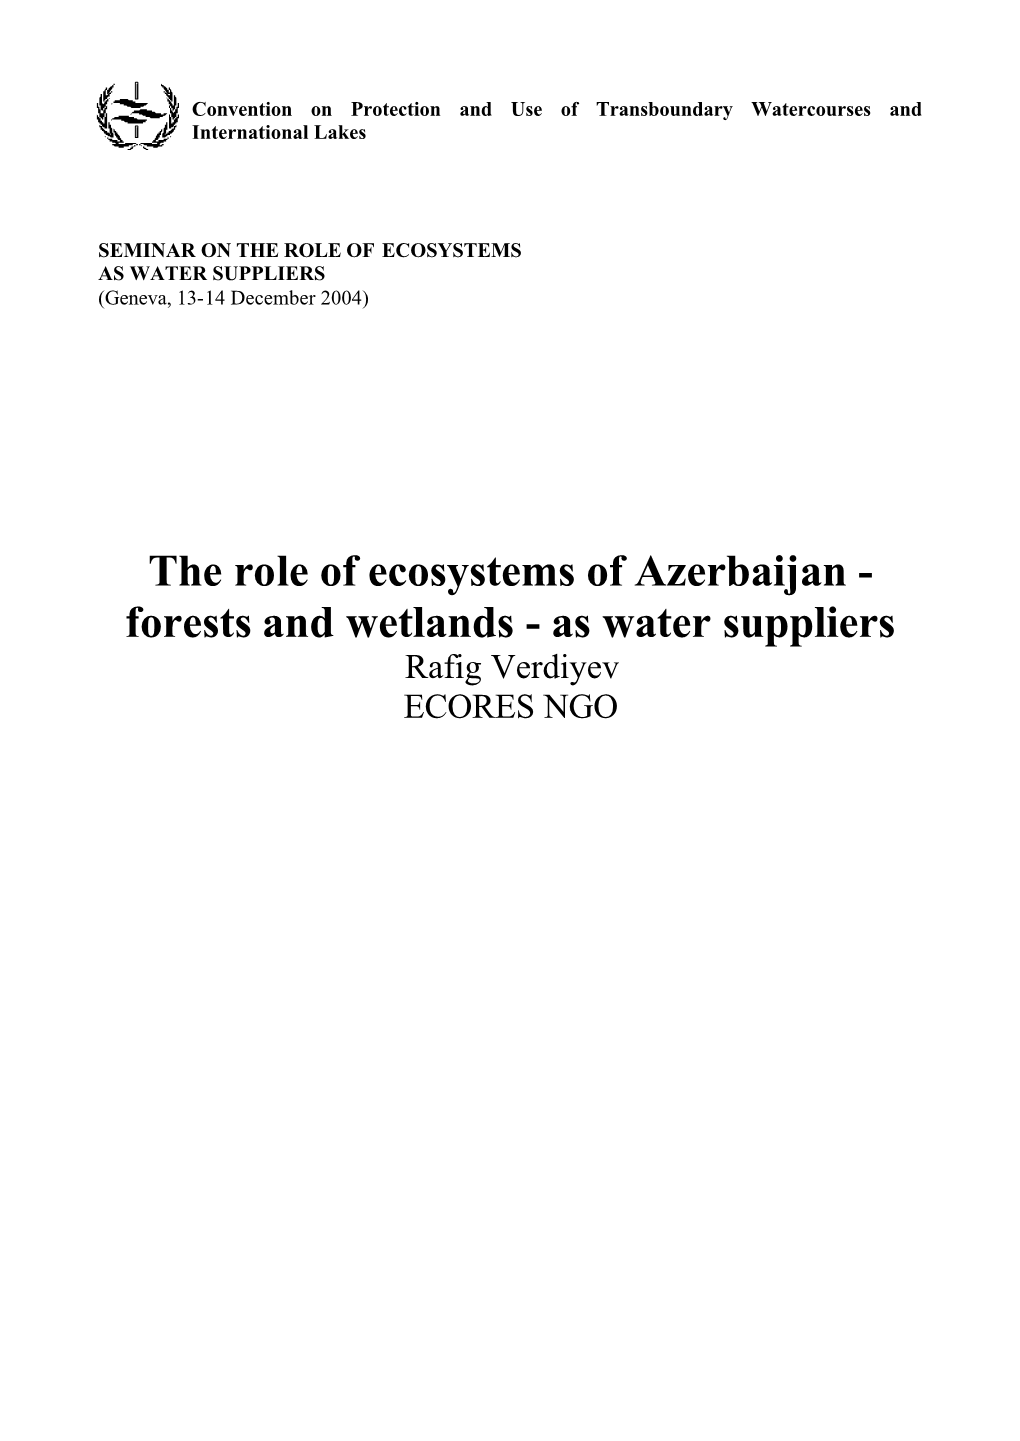 The Role of Ecosystems of Azerbaijan - Forests and Wetlands - As Water Suppliers Rafig Verdiyev ECORES NGO